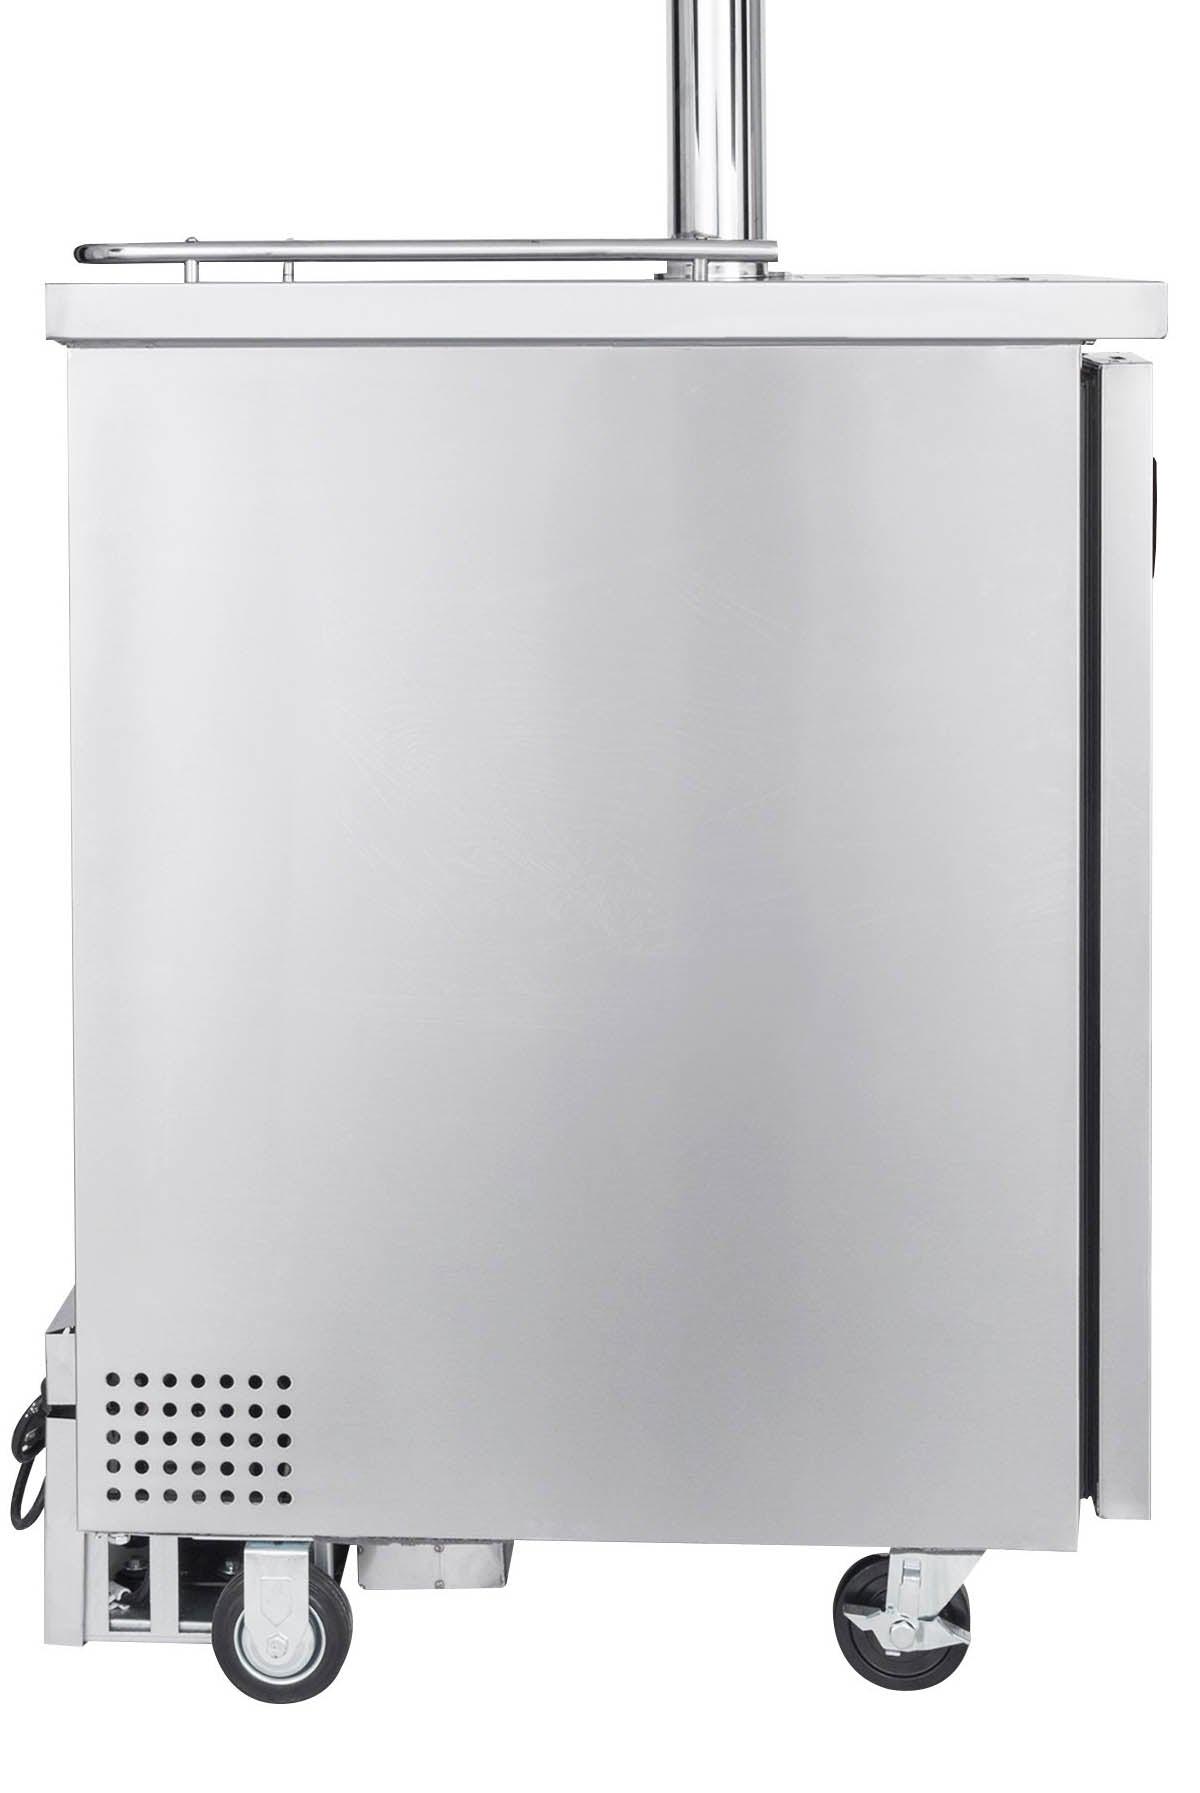 24" Wide Kombucha Dual Tap All Stainless Steel Commercial Kegerator